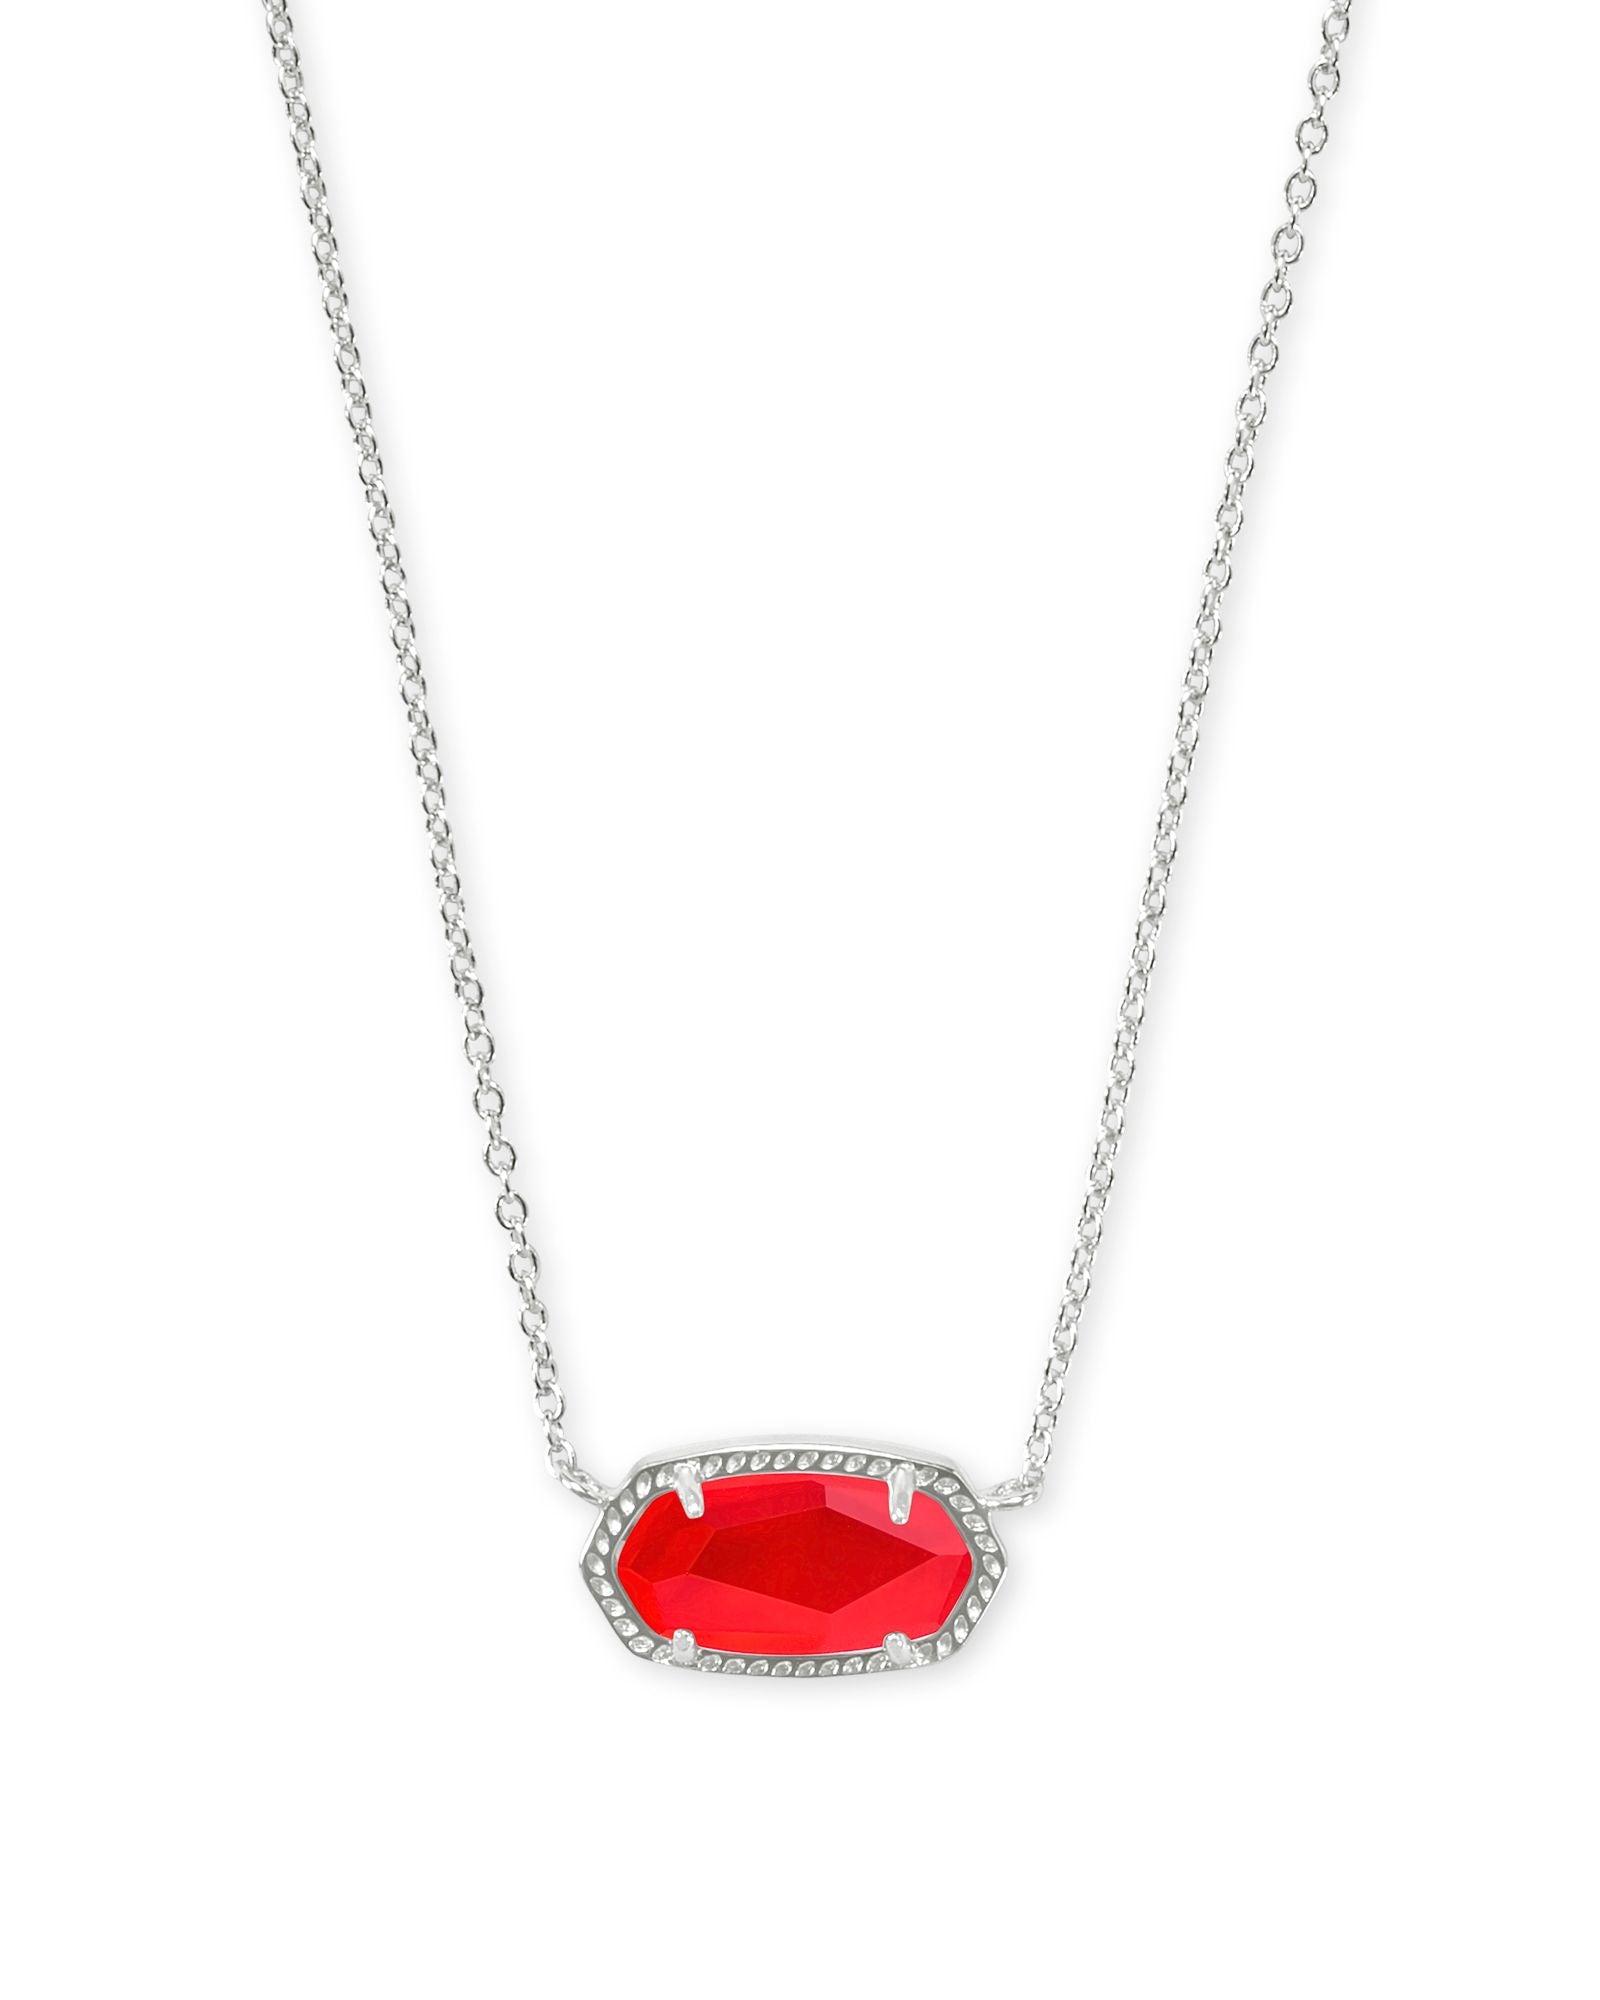 Kendra Scott | Elisa Silver Pendant Necklace in Red Illusion - Giddy Up Glamour Boutique